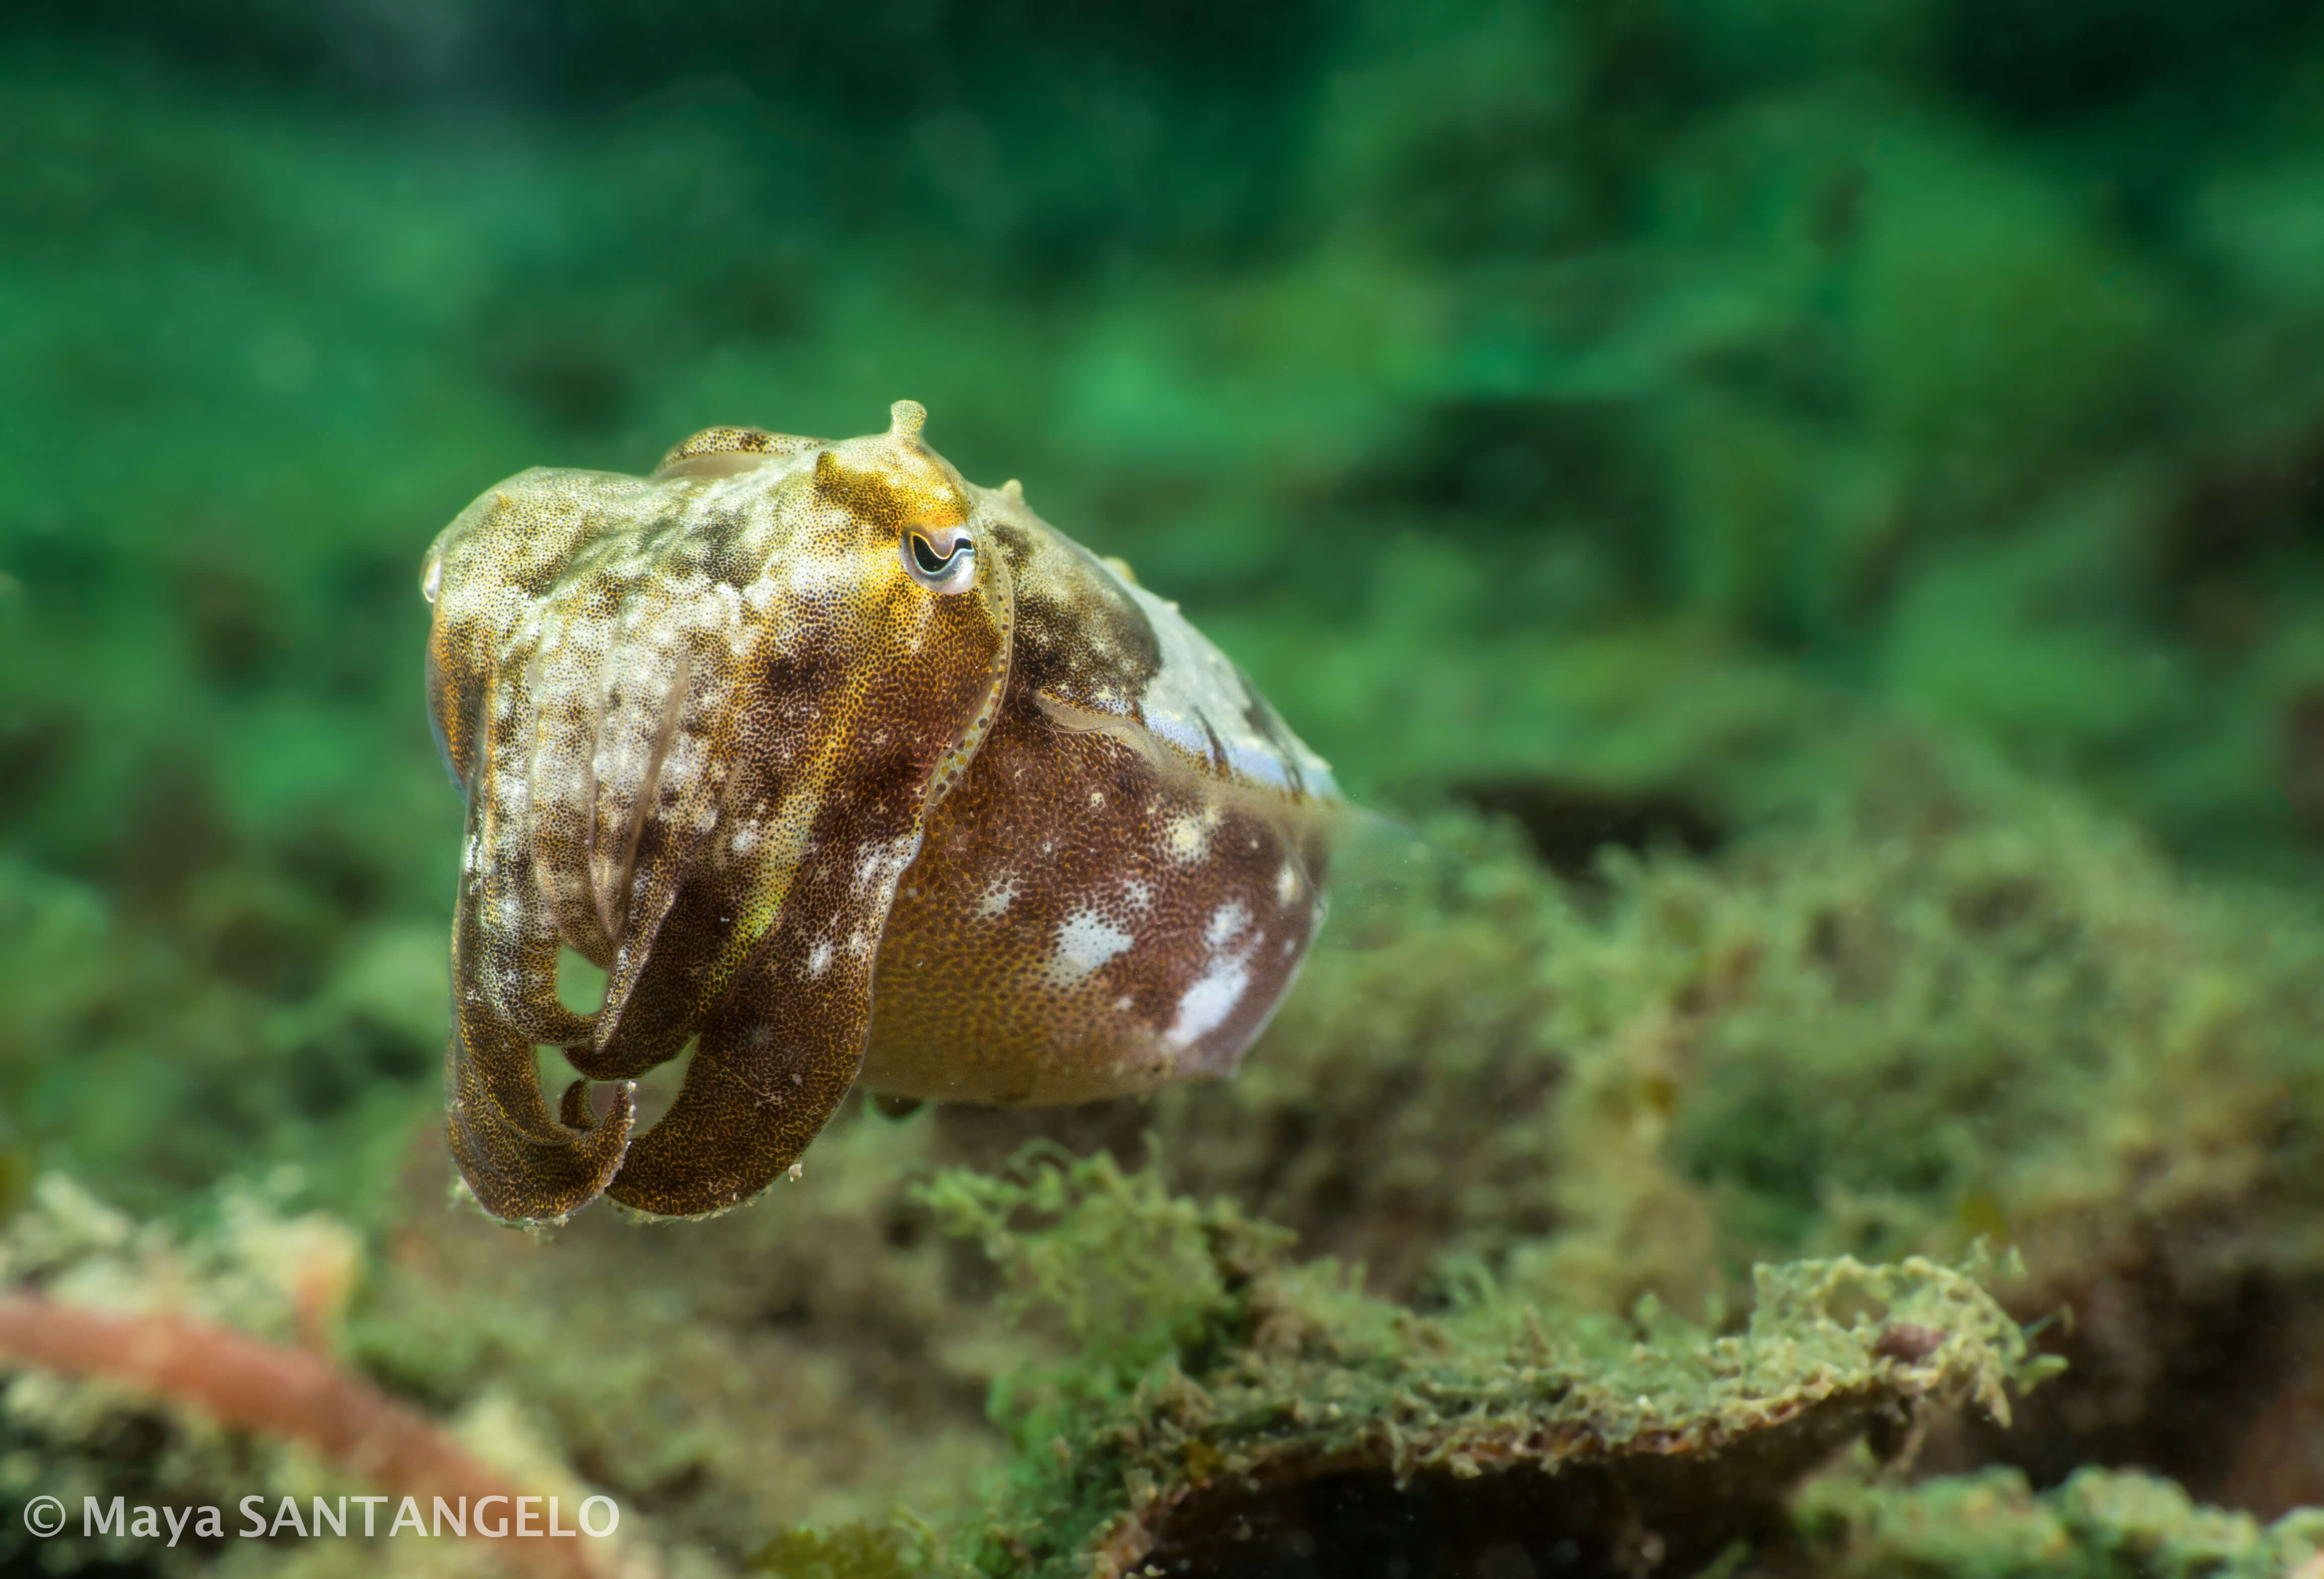 Mourning Cuttlefish (Sepia plangon) at Chowder Bay.